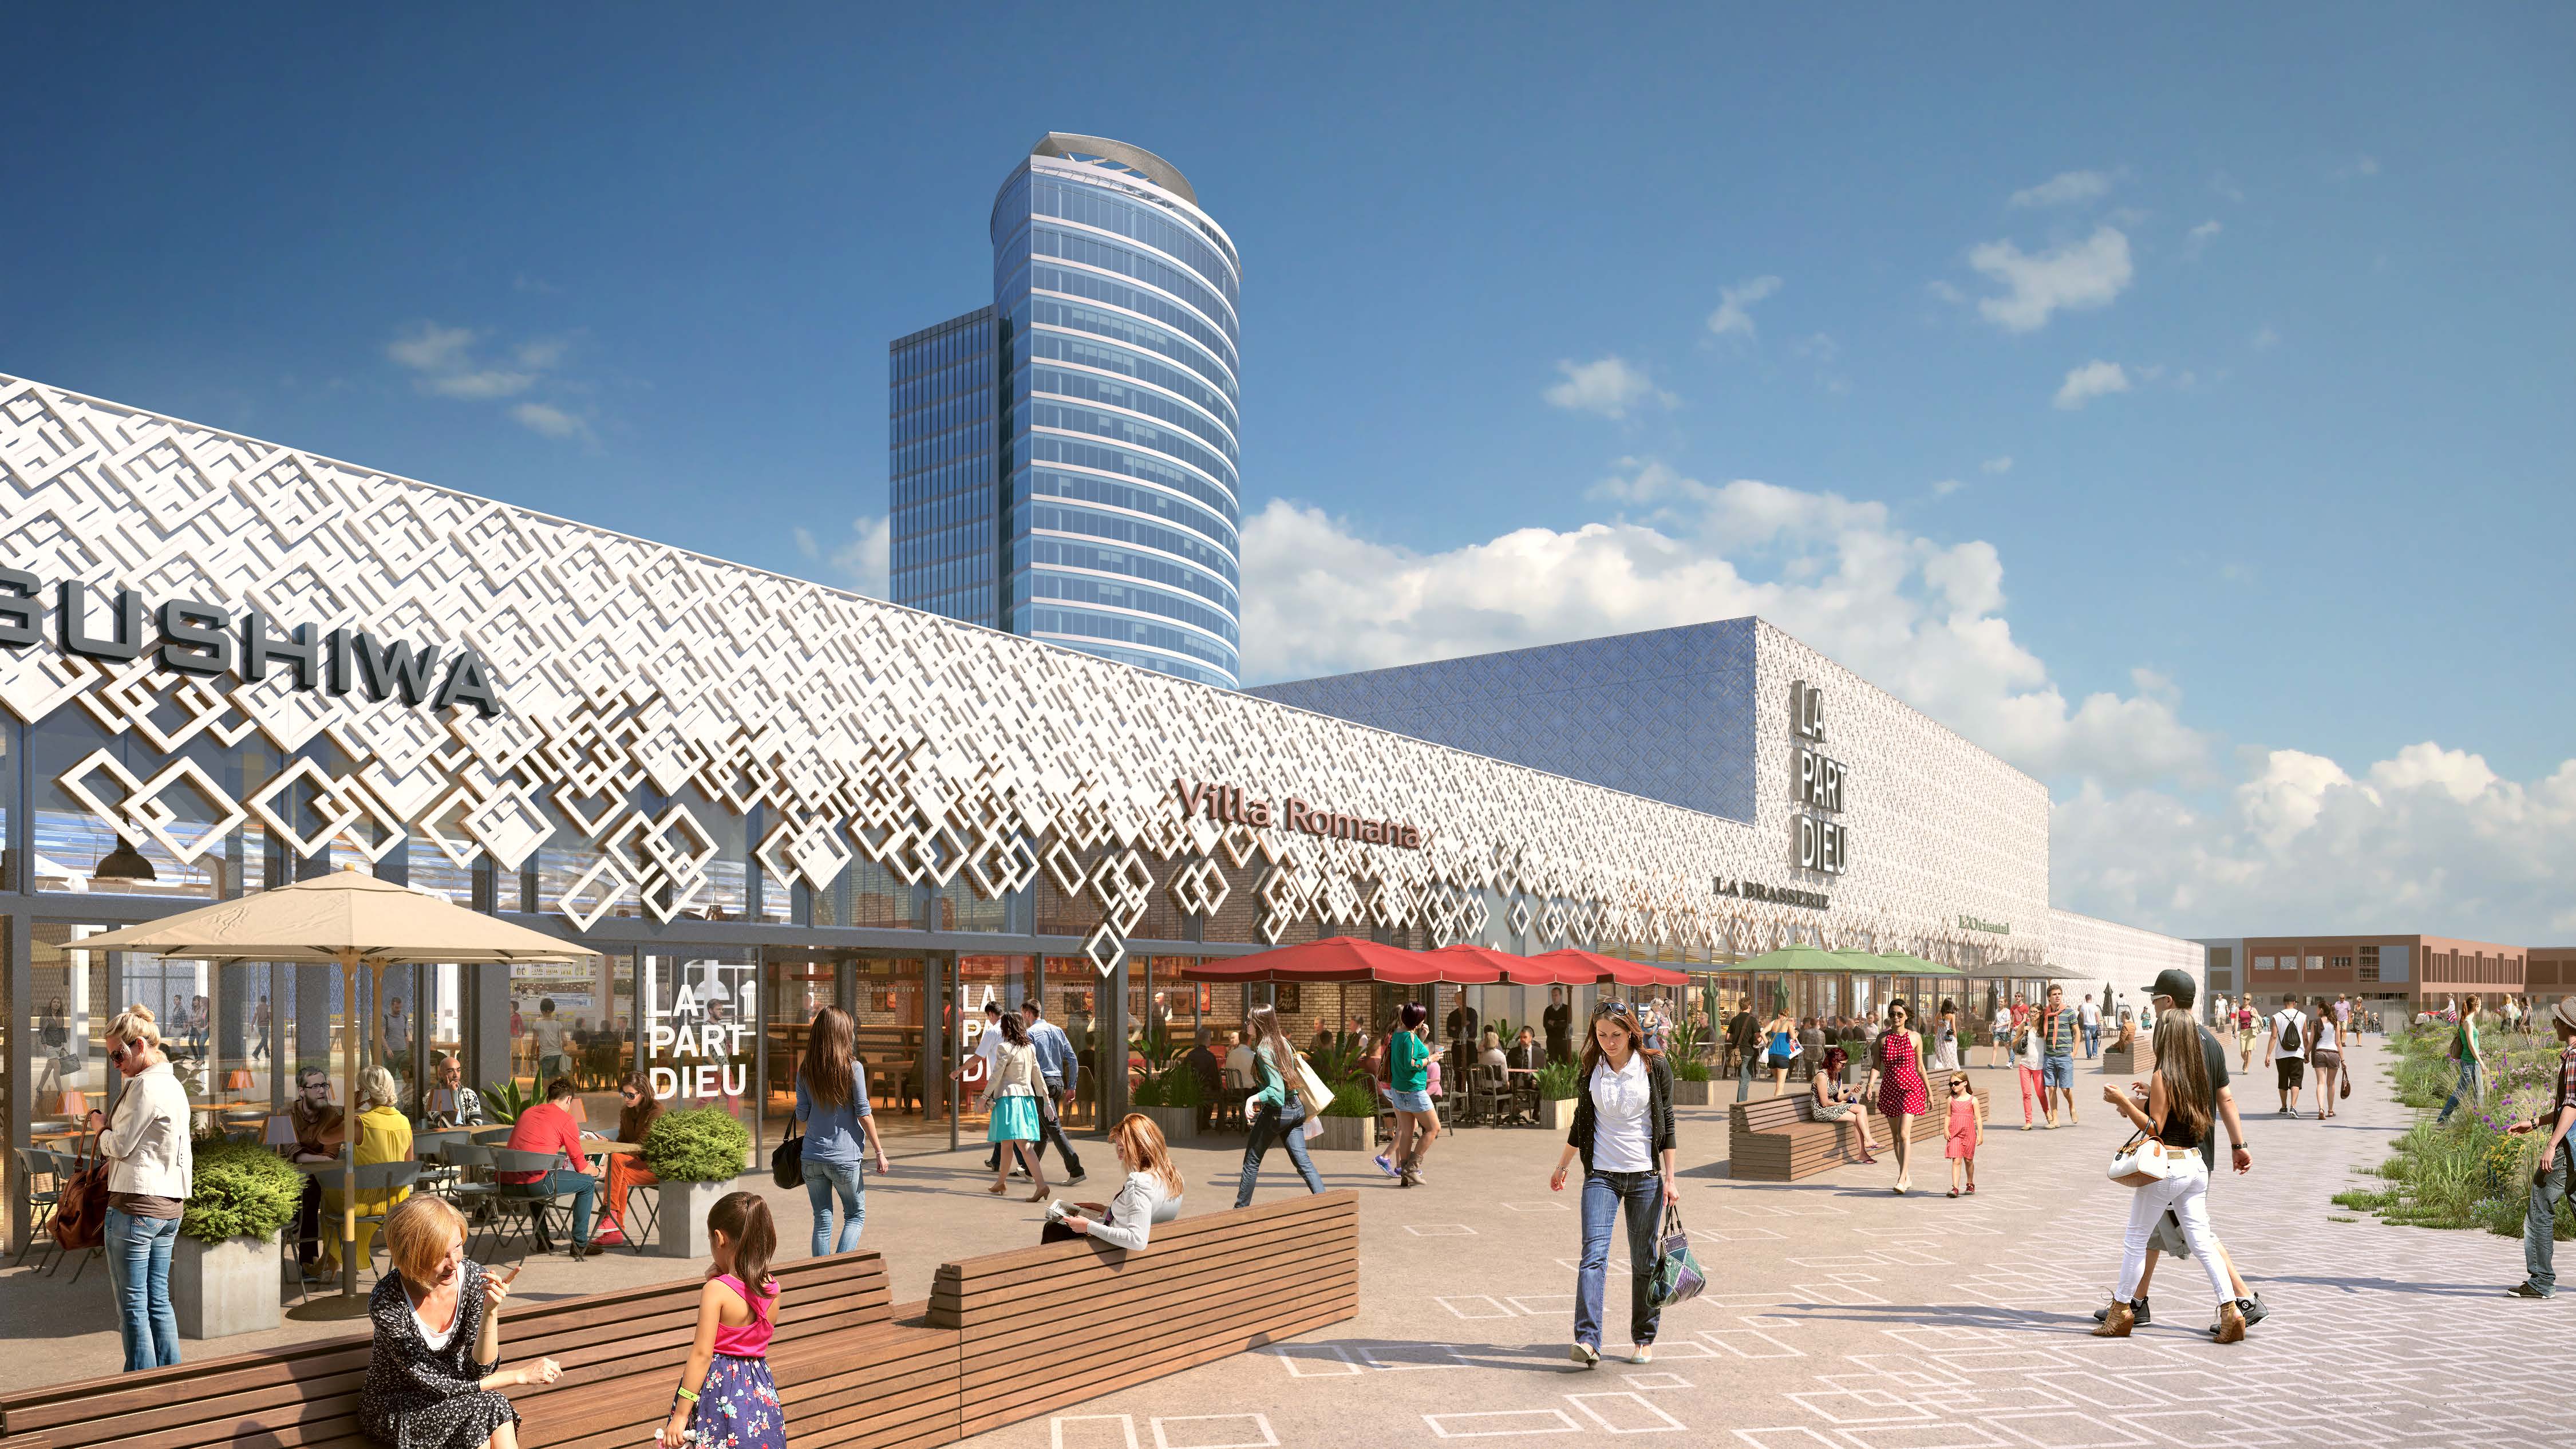 How the shopping centre is transforming